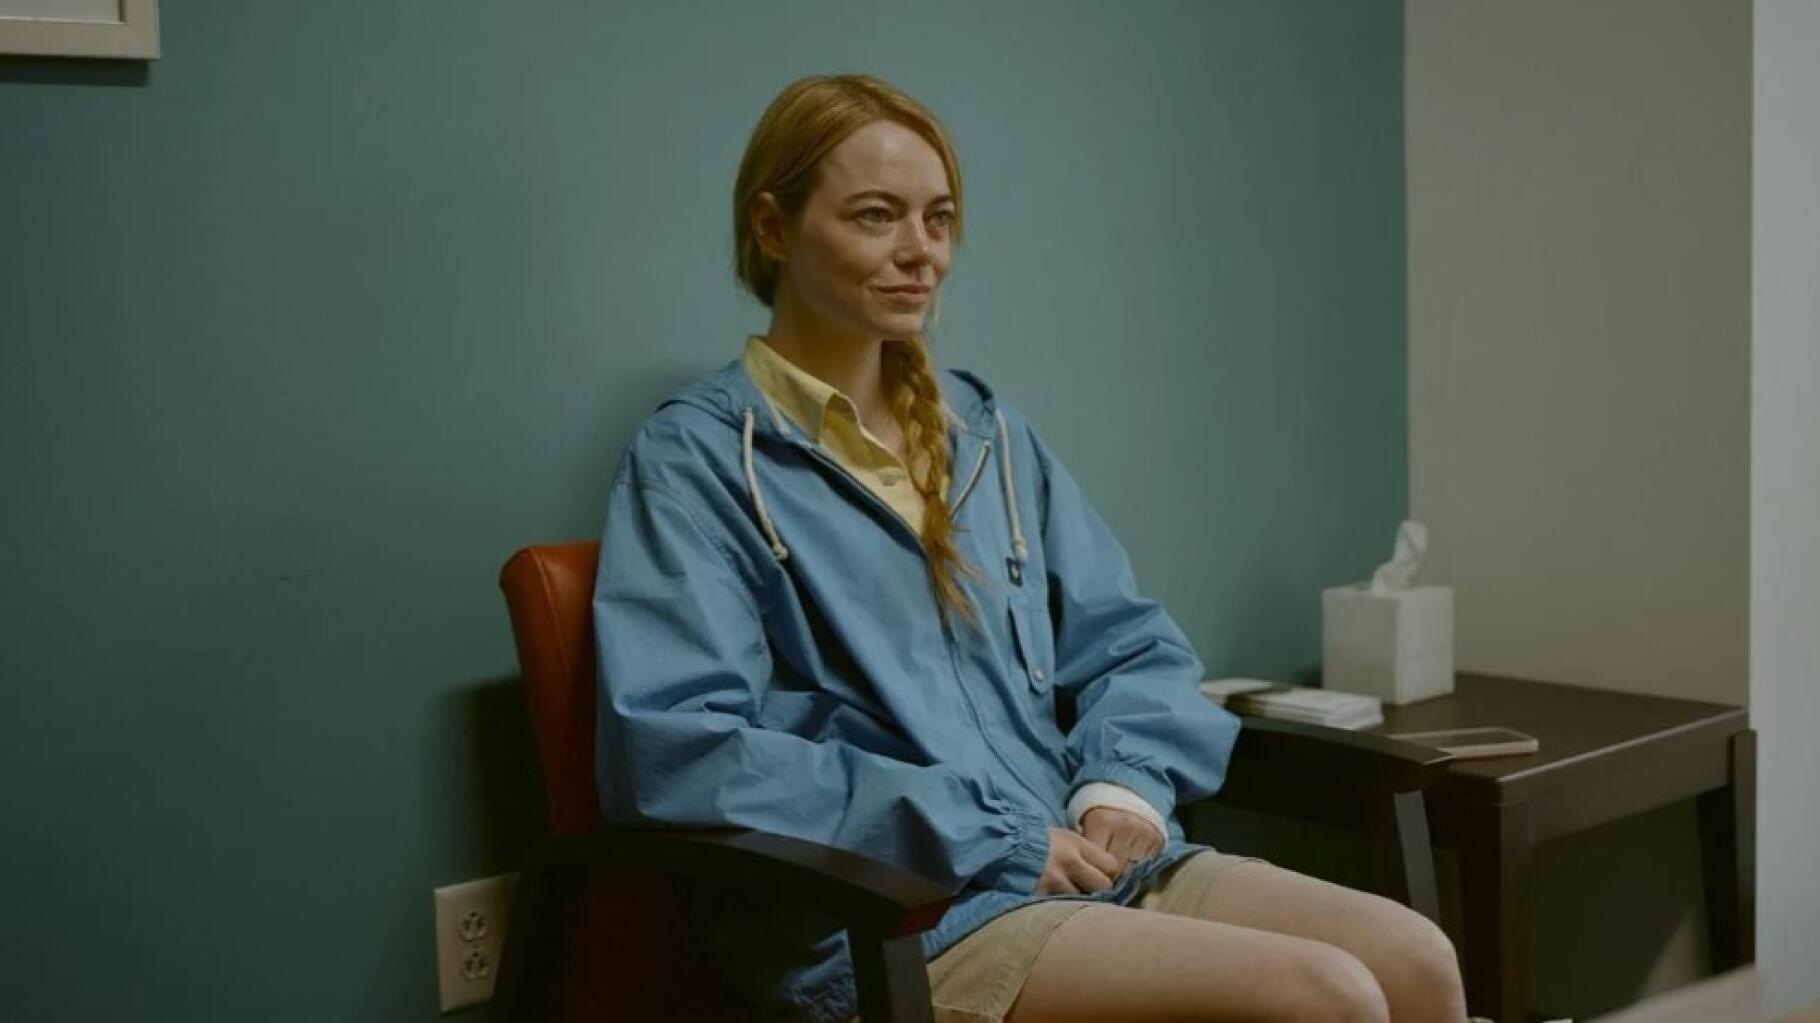 Kinds of Kindness with Emma Stone, a 3-in-1 movie that won’t upset your stomach